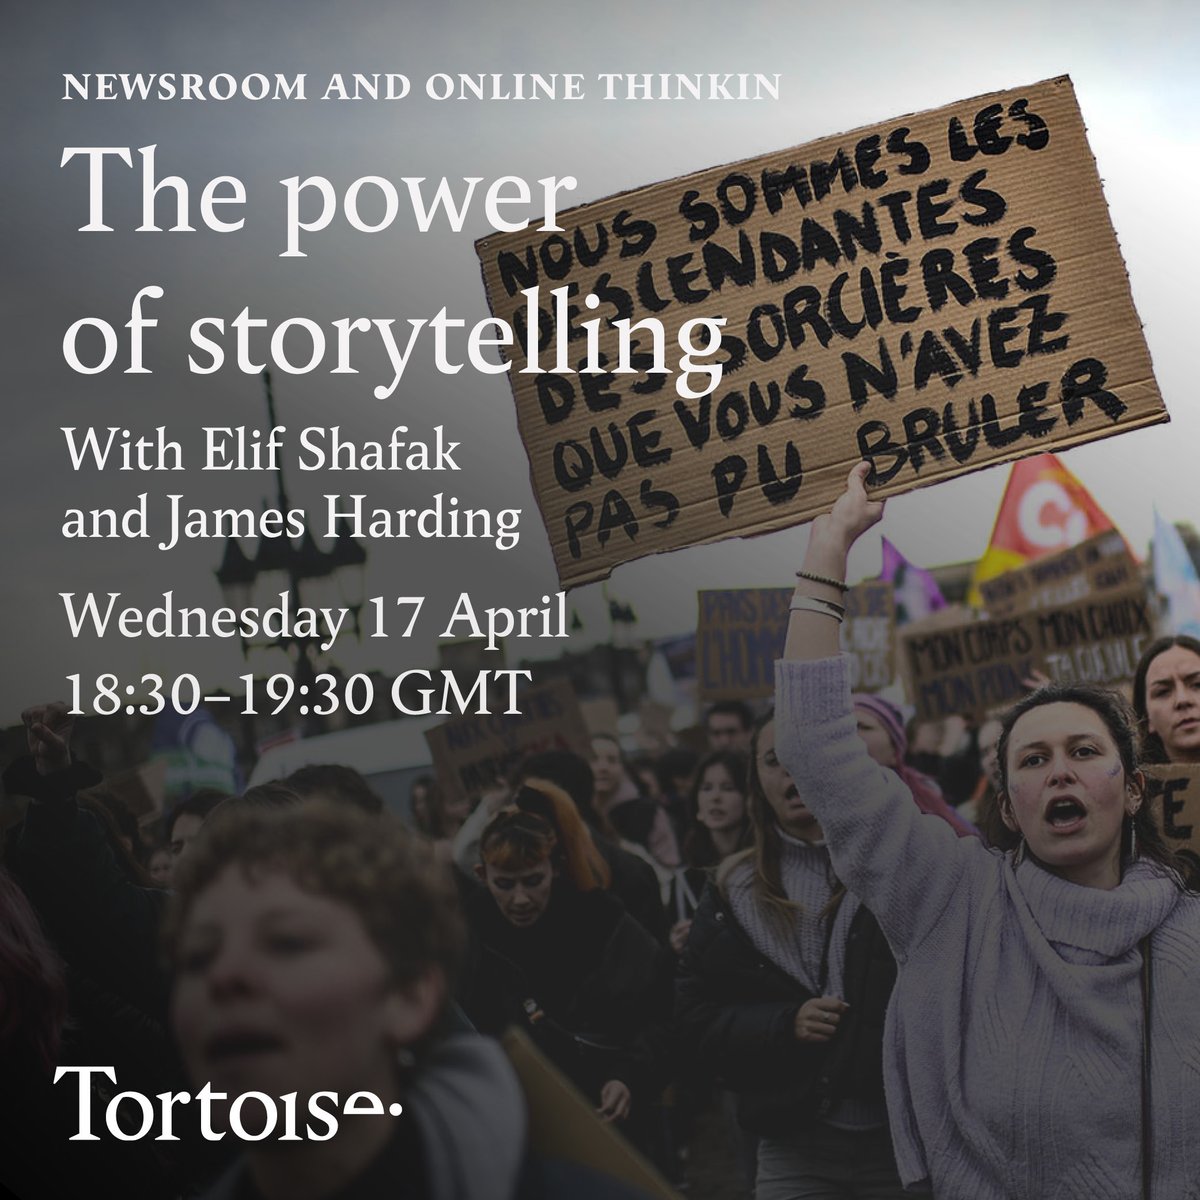 In an age of division and disinformation, it can feel like we live powerlessly. On 17 April, join us live in the newsroom in conversation with award-winning British-Turkish writer @Elif_Safak as we consider the power of words as resistance. Book now: torto.se/3PsJic5